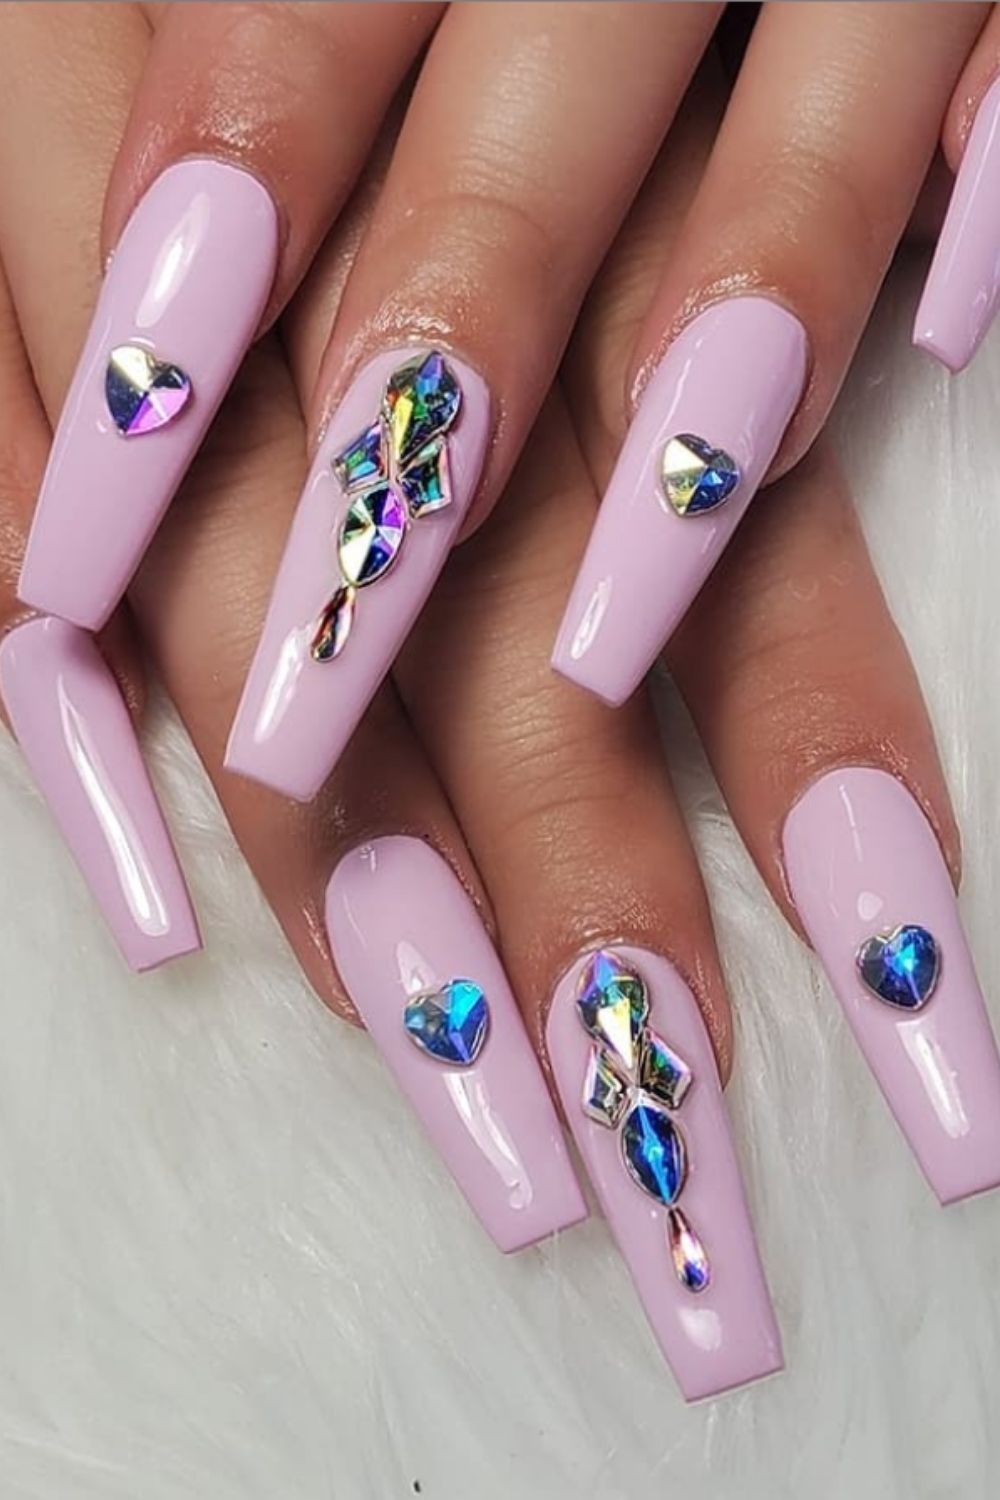 Soft pink nails with rhinestones